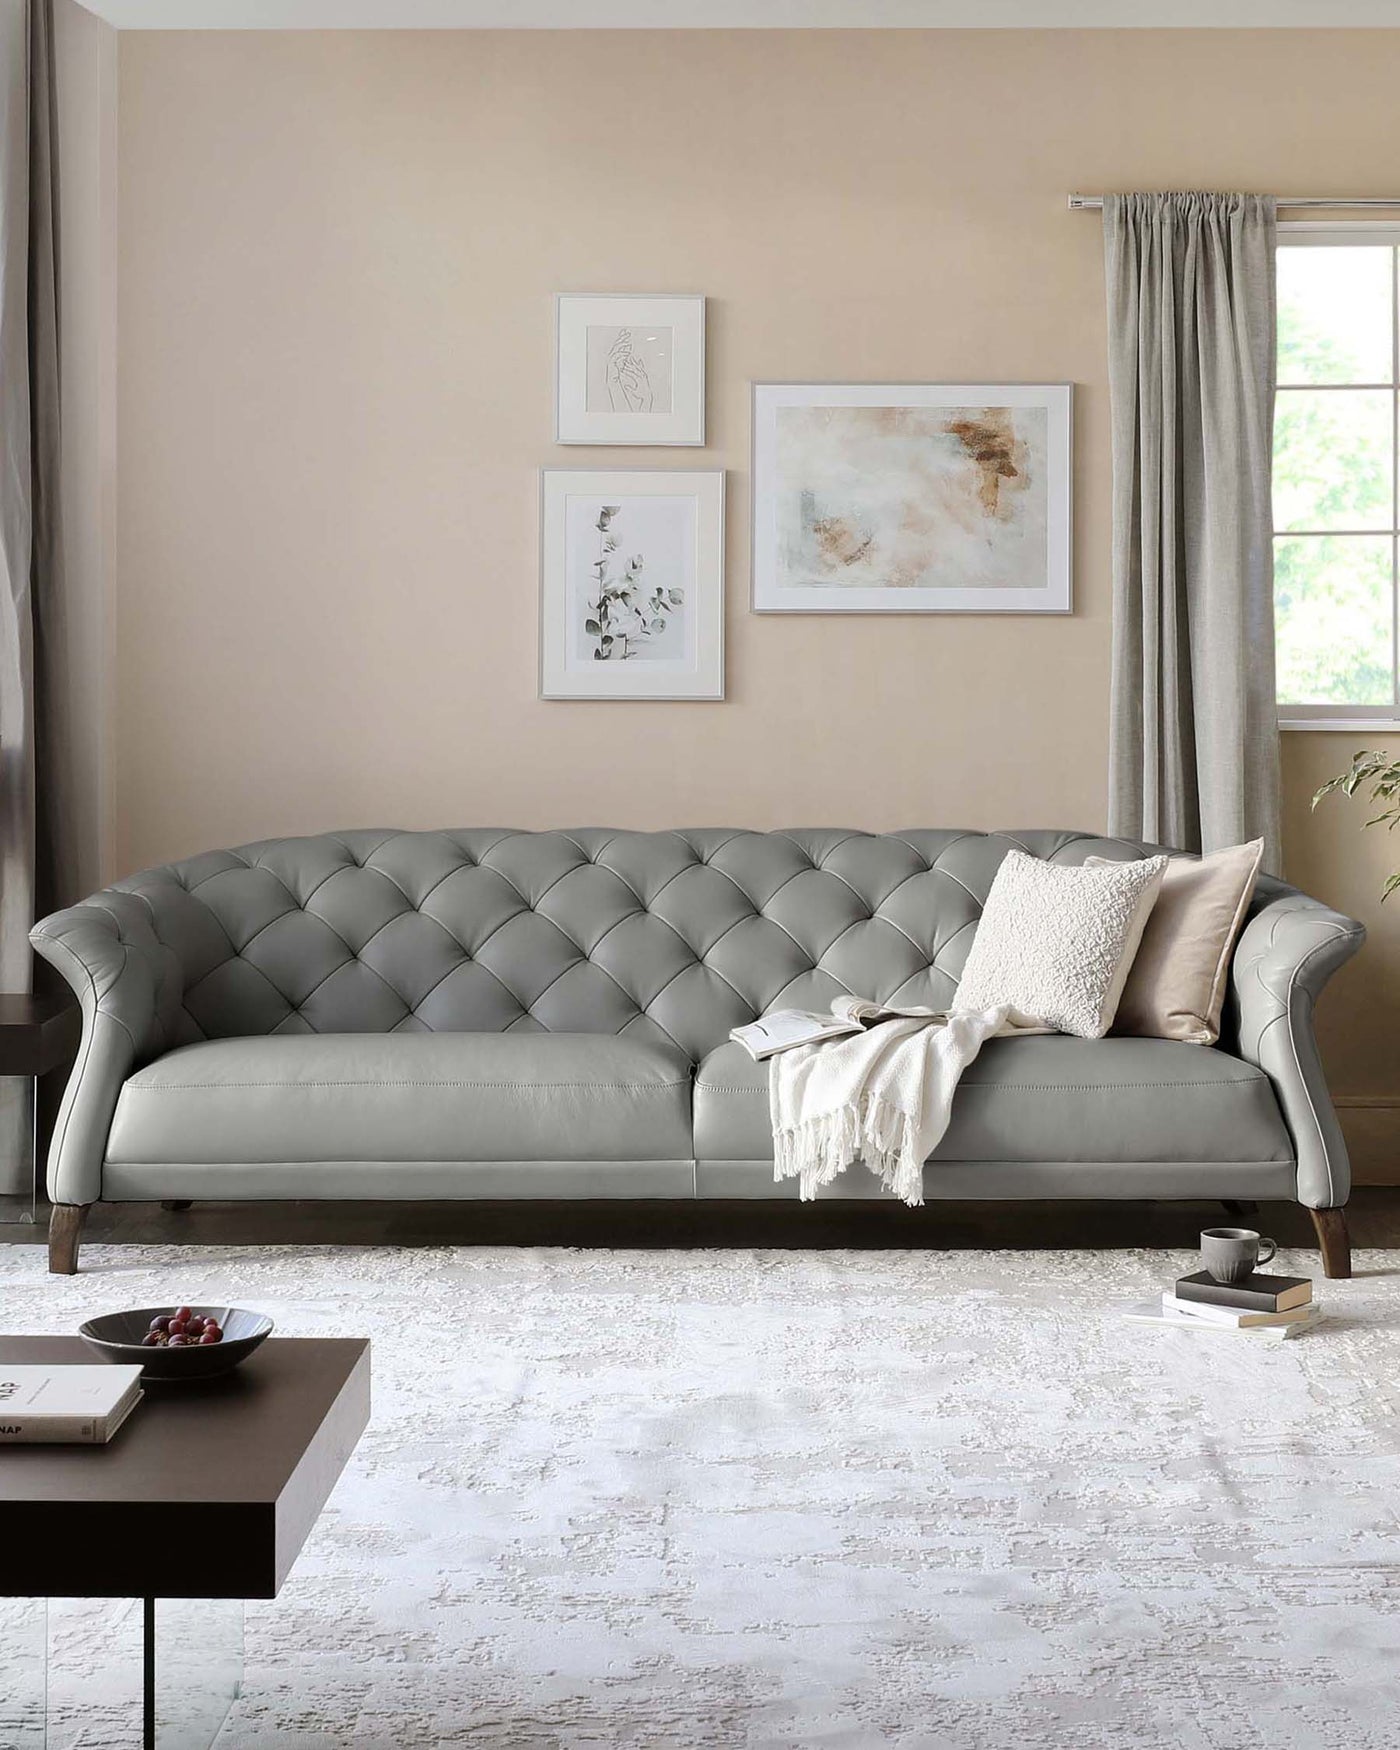 Elegant light grey tufted chesterfield sofa with rolled arms and a nail head trim detail. Accompanied by a modern square black coffee table, and a light two-toned area rug beneath. The sofa is adorned with a white throw blanket and a textured off-white decorative pillow.